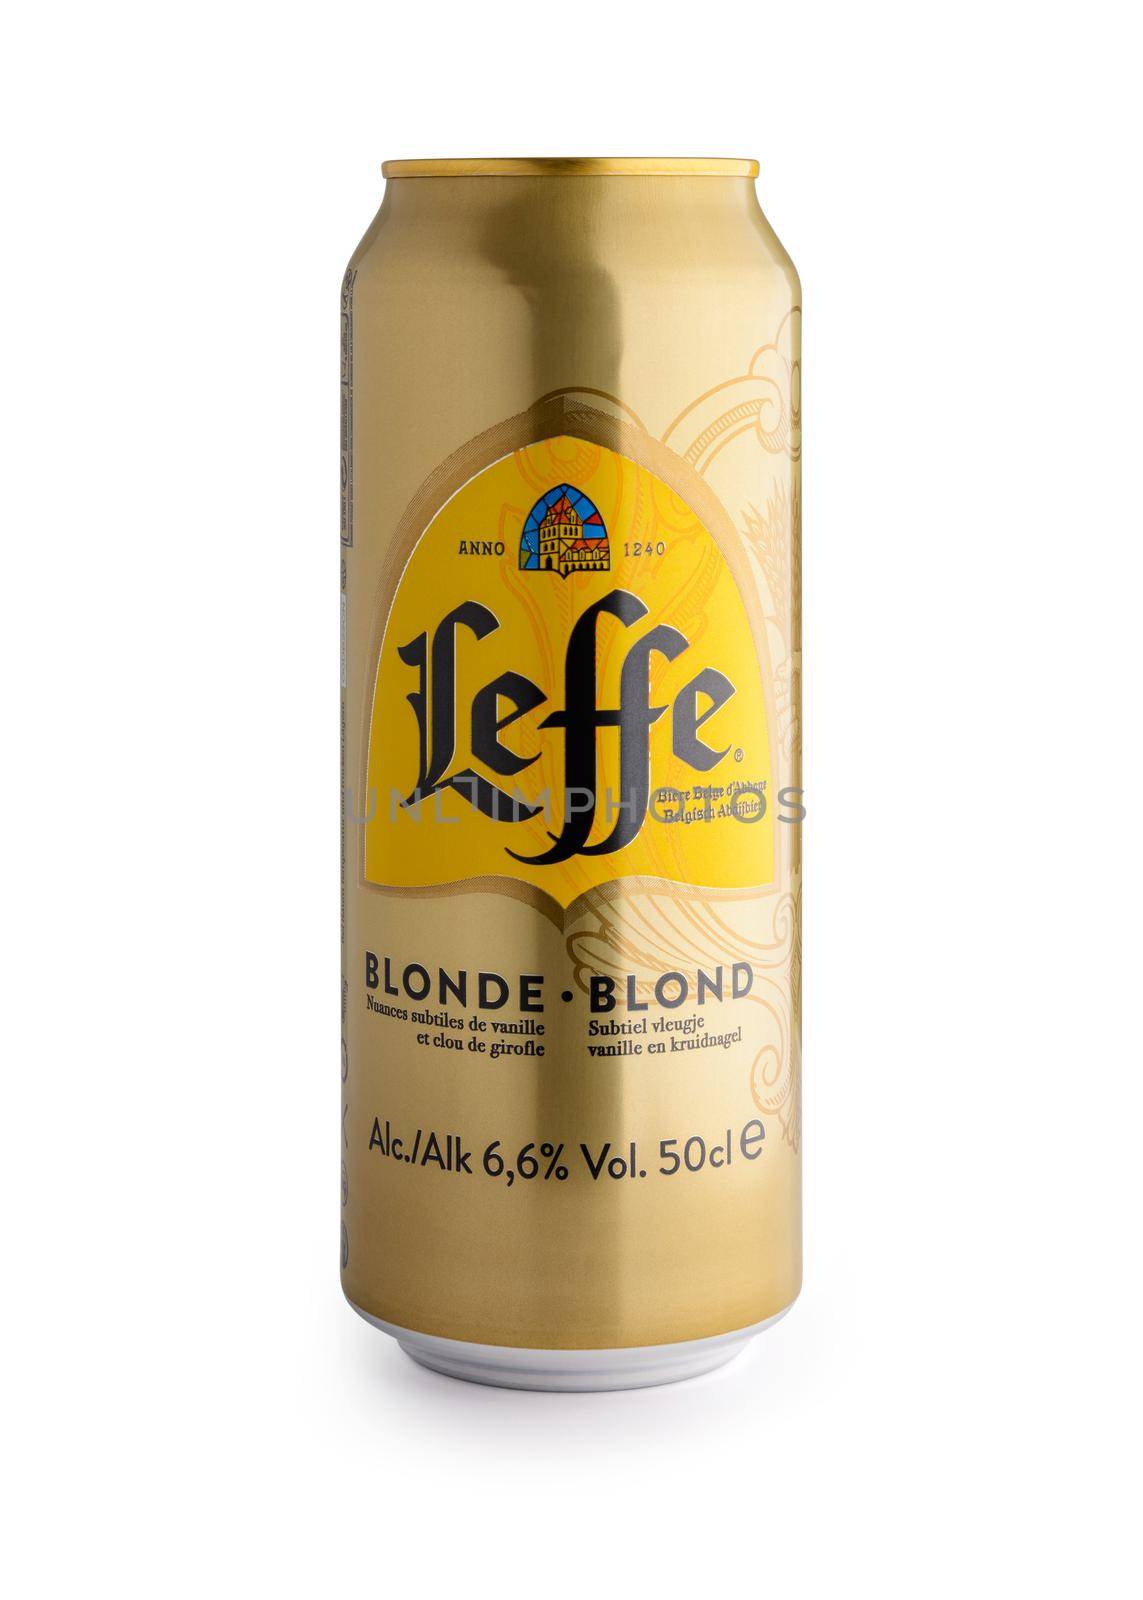 Leffe beer can on white background by dutourdumonde